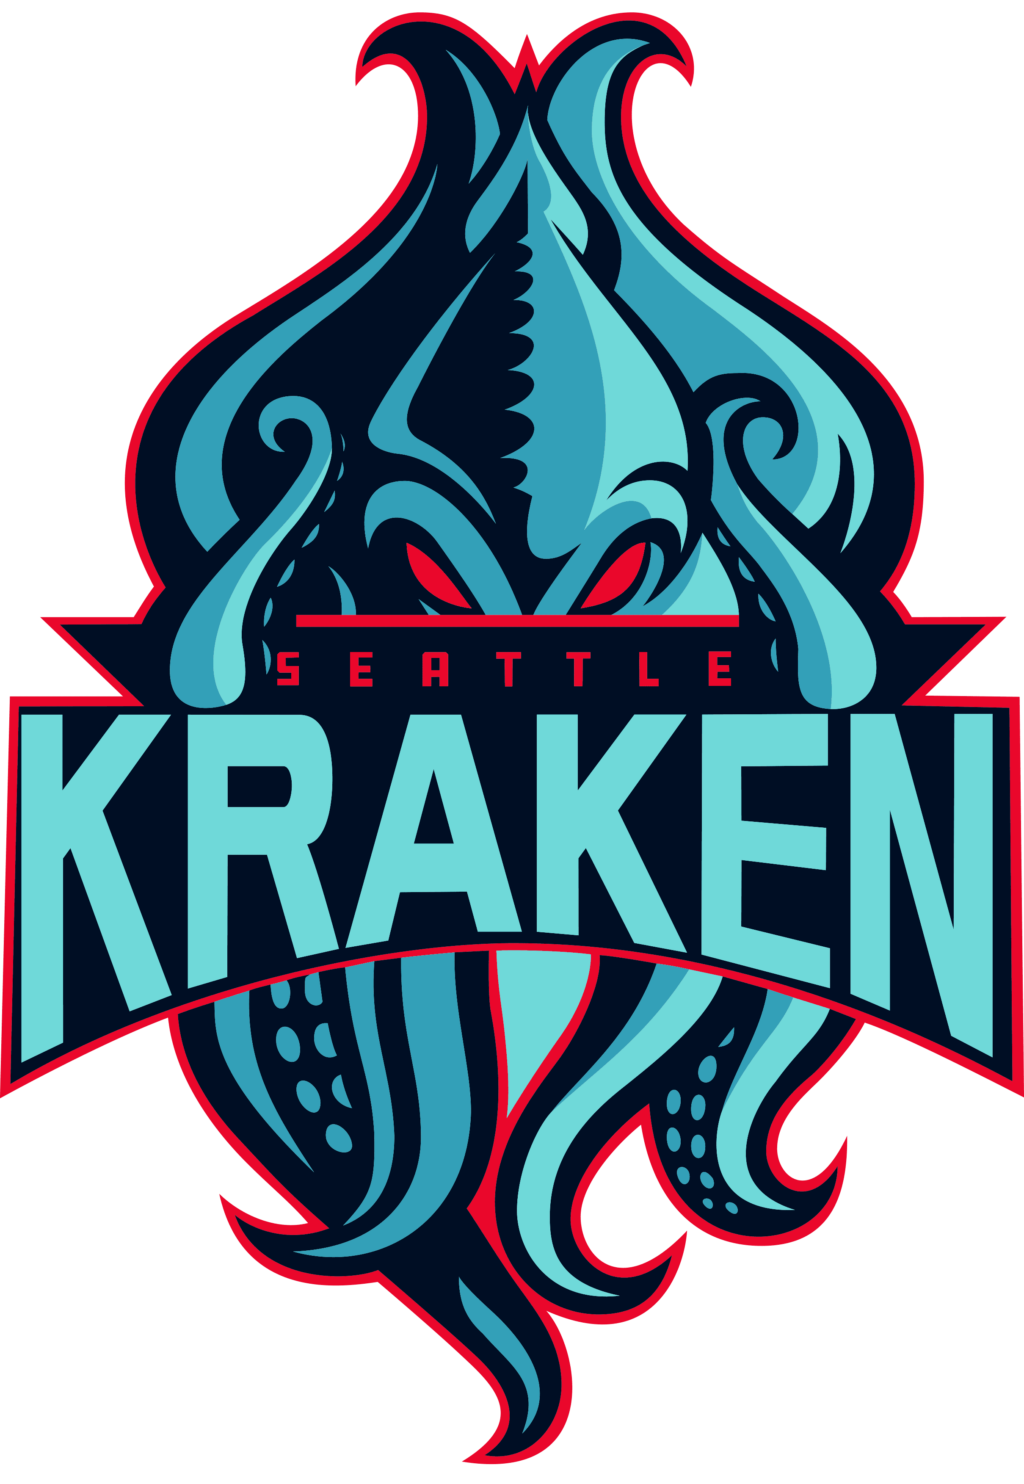 seattle kraken 15 NHL Seattle Kraken, Seattle Kraken SVG Vector, Seattle Kraken Clipart, Seattle Kraken Ice Hockey Kit SVG, DXF, PNG, EPS Instant download NHL-Files for silhouette, files for clipping.